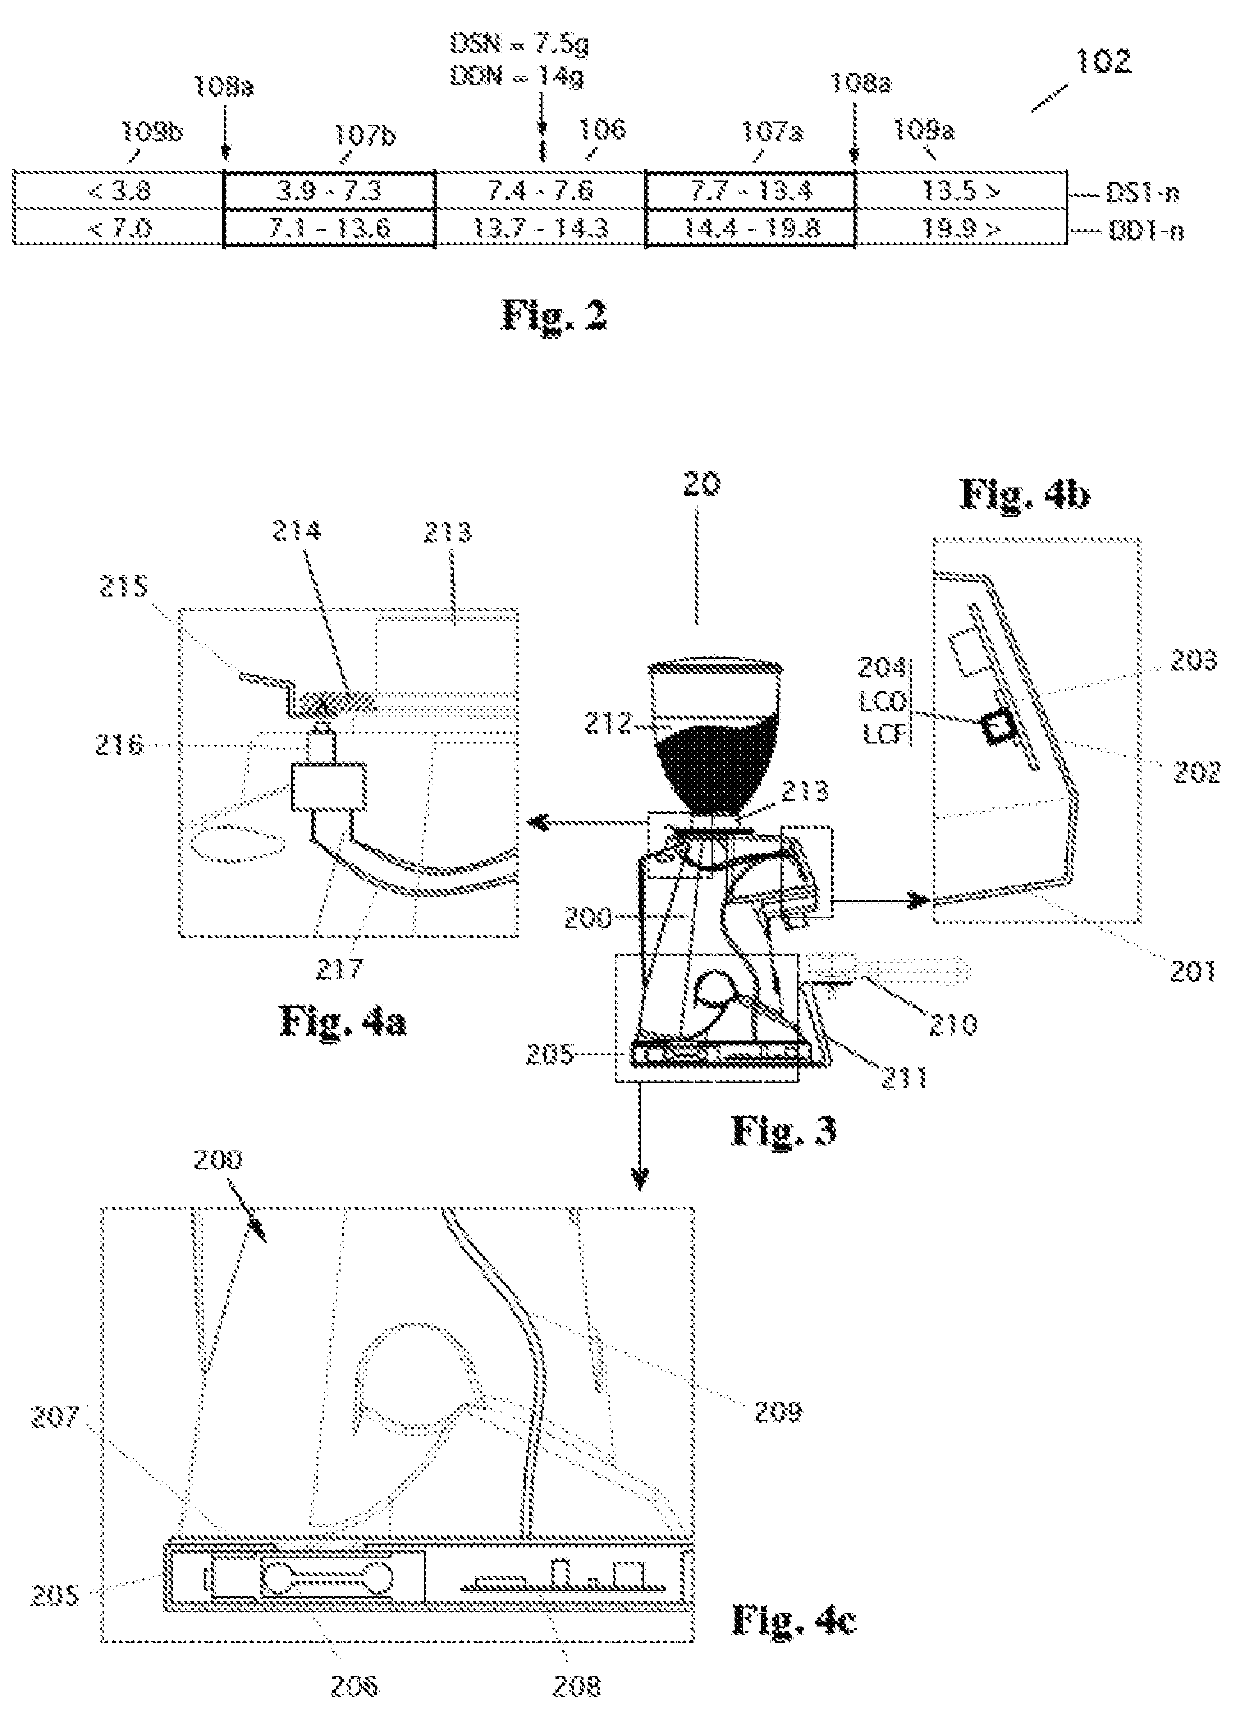 Method for the instantaneous self-calibration of the dose for a coffee grinder-doser apparatus